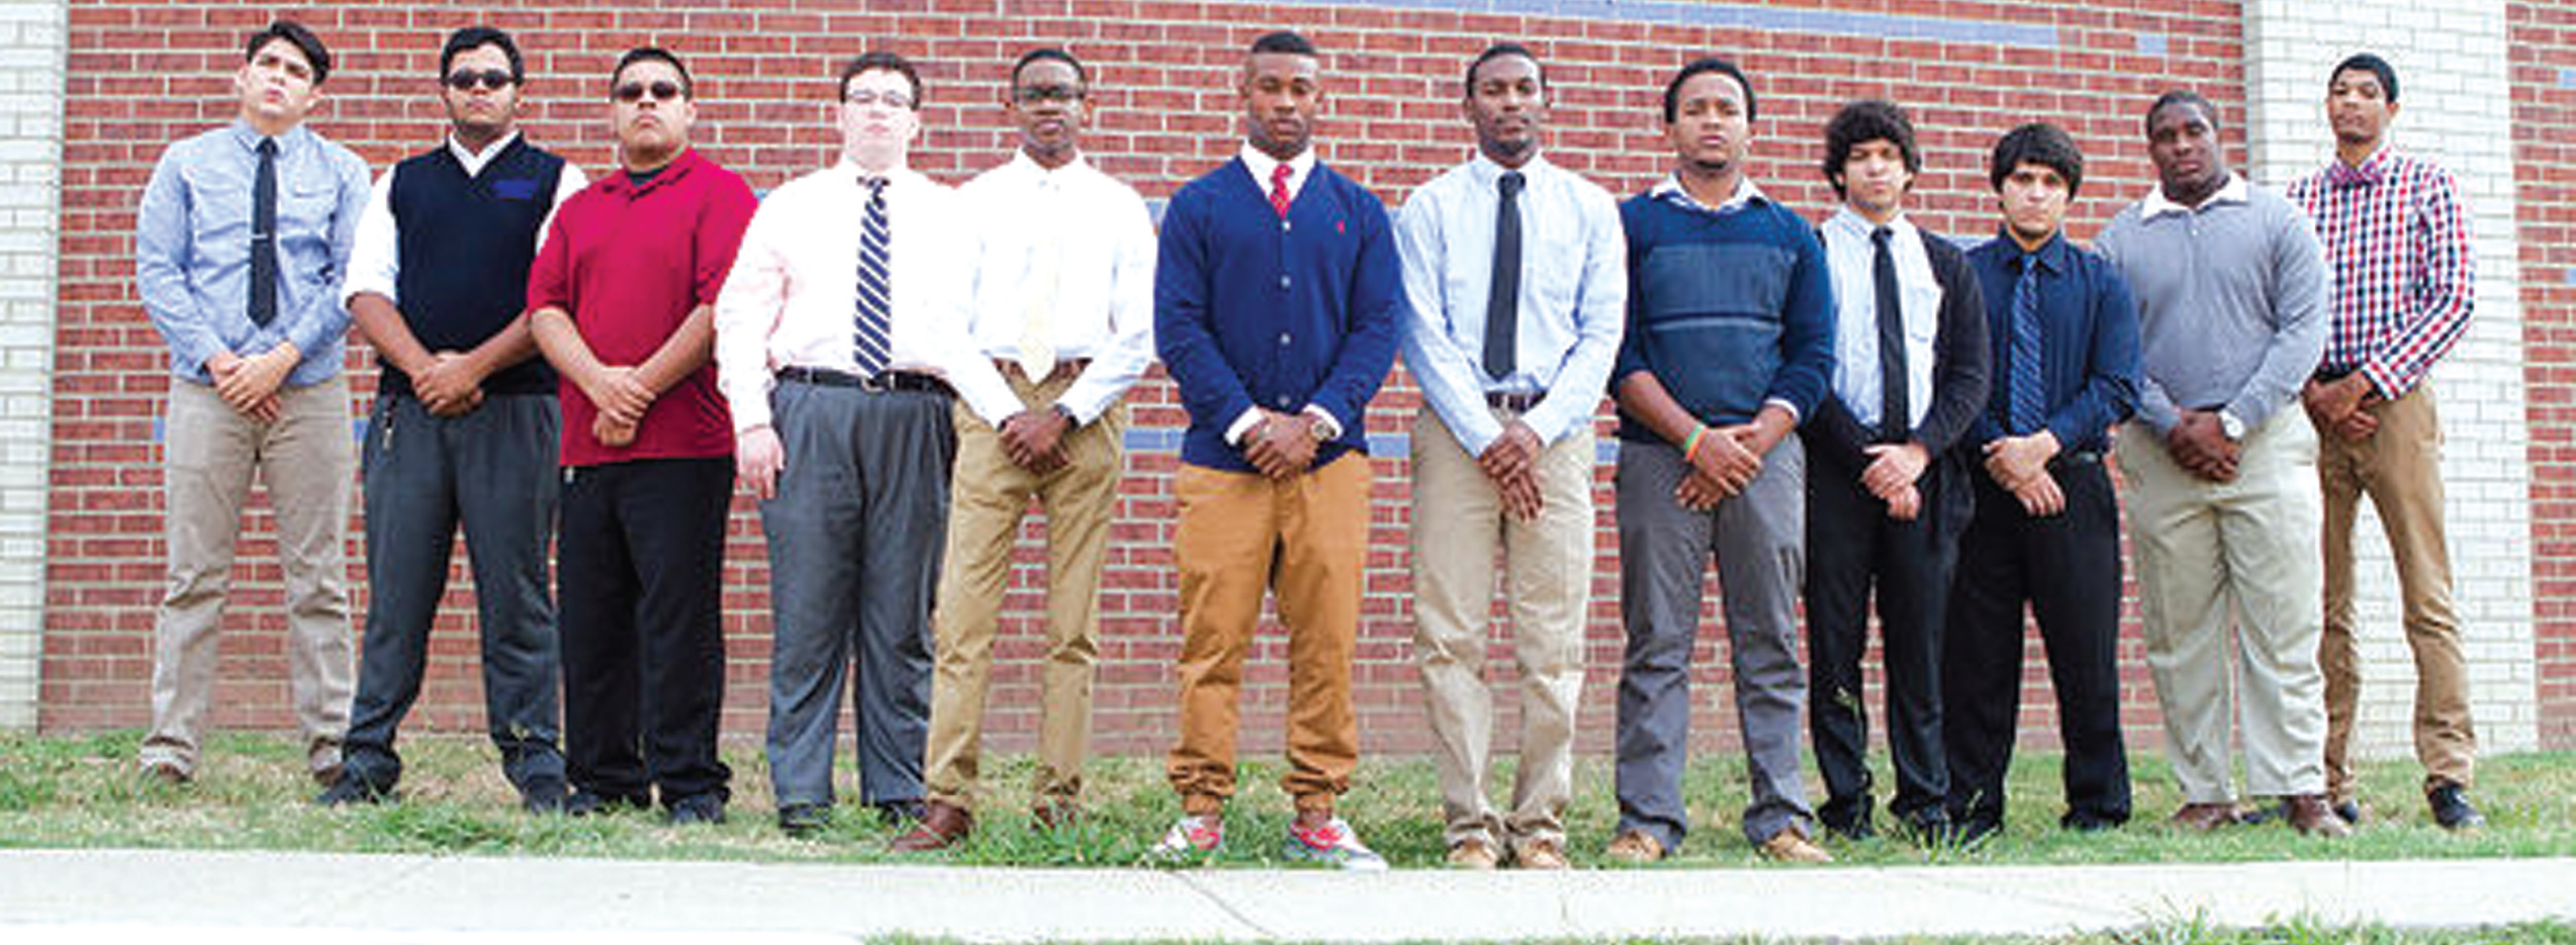 The first senior class at Barack Obama Male Leadership Academy, which opened in August 2011, will graduate this school year, as they set out to be top leaders in the real world.